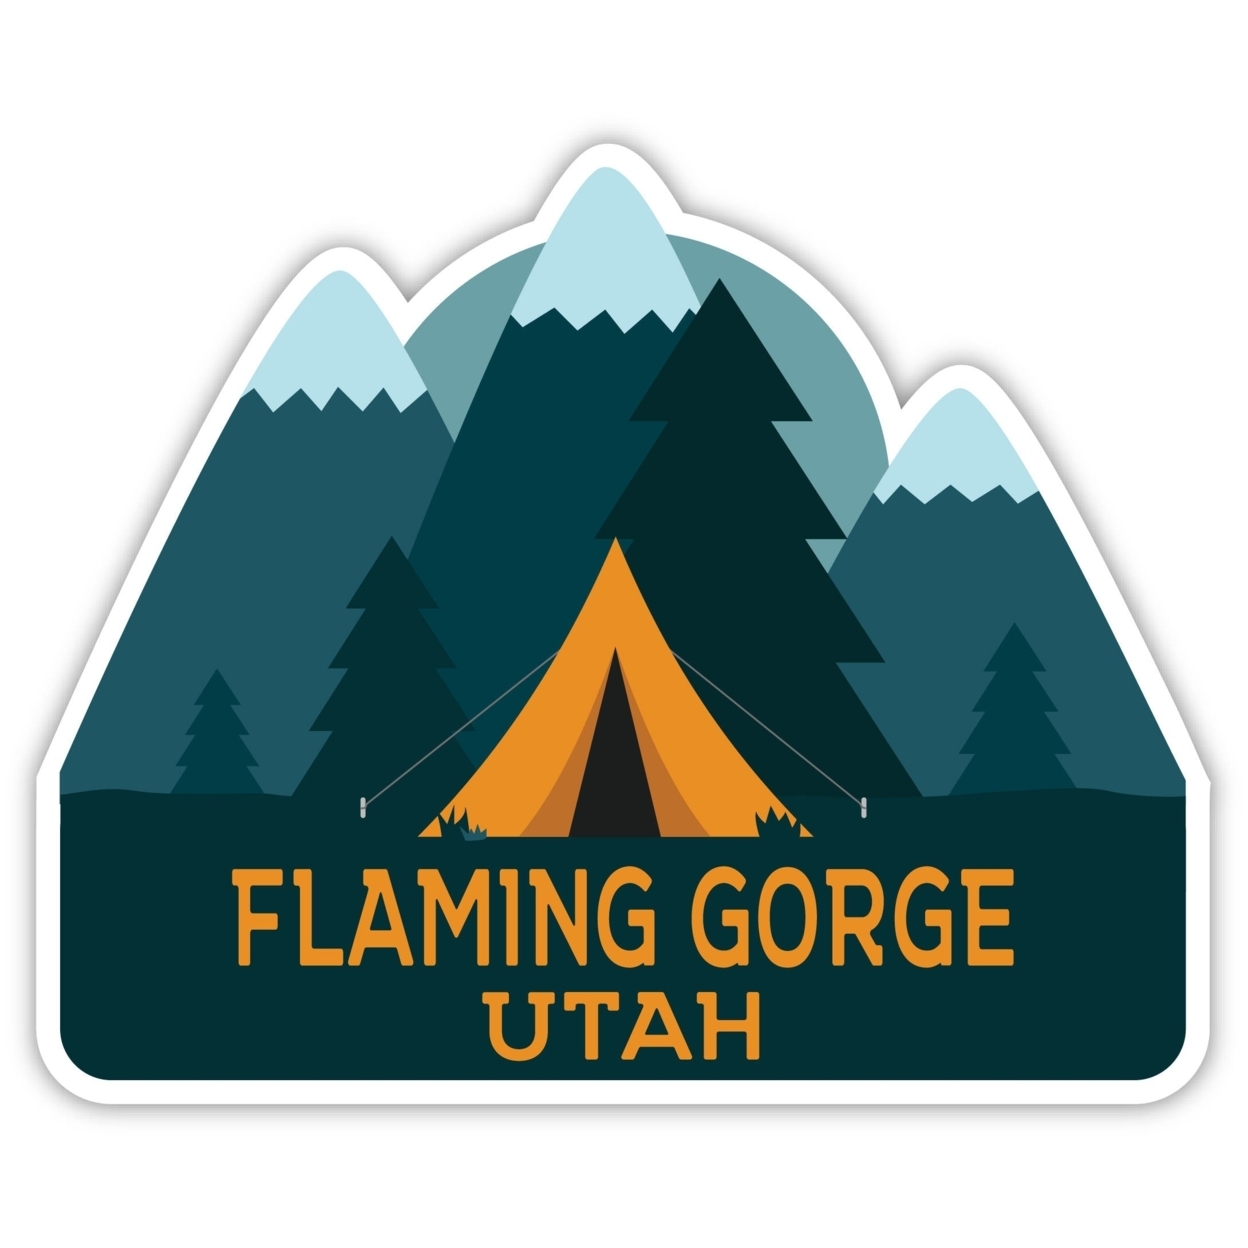 Flaming Gorge Utah Souvenir Decorative Stickers (Choose Theme And Size) - 4-Pack, 4-Inch, Camp Life